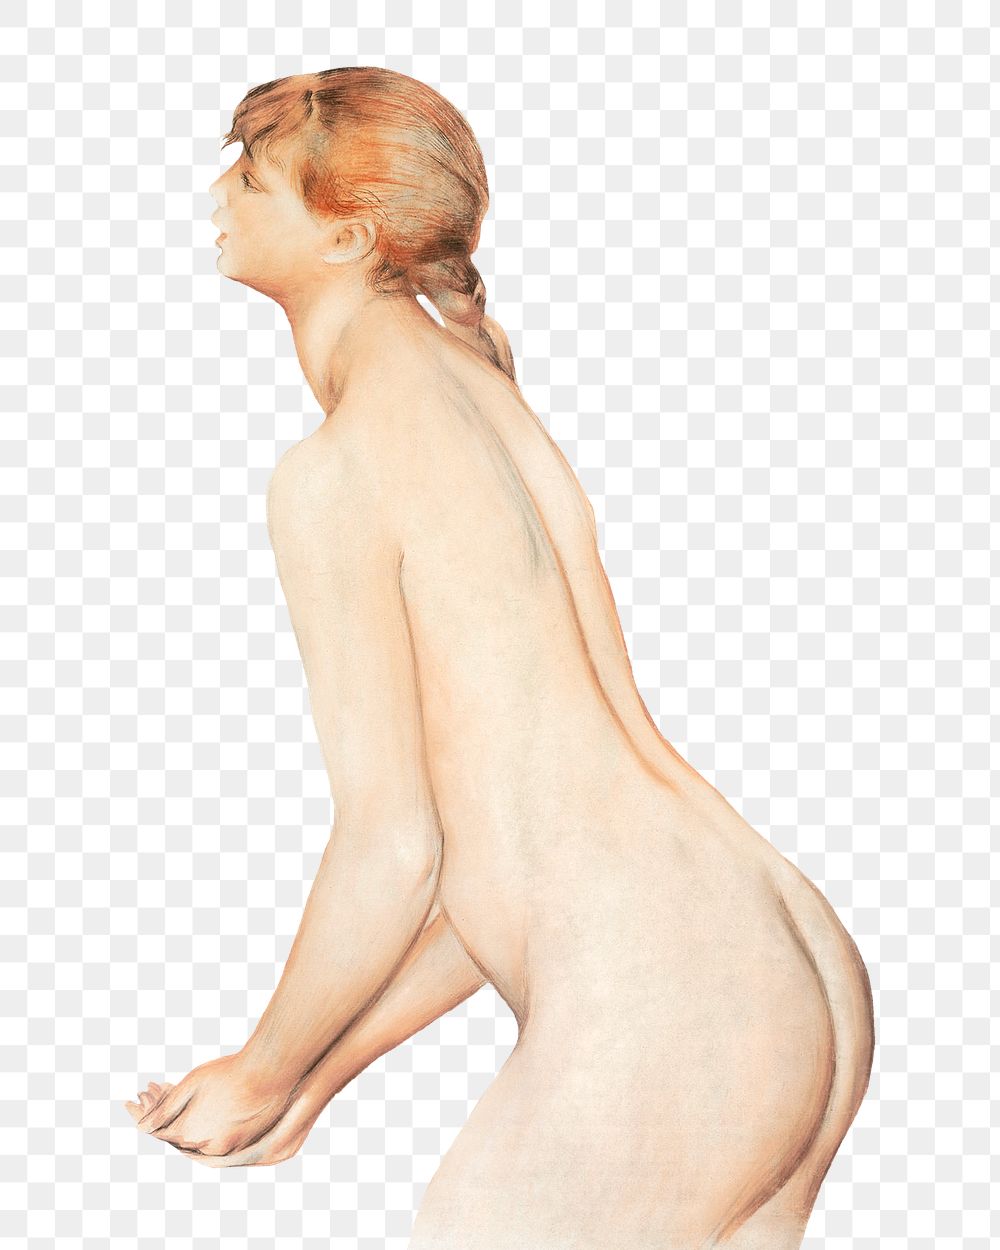 Naked woman png sticker, Renoir-inspired artwork, transparent background, remixed by rawpixel